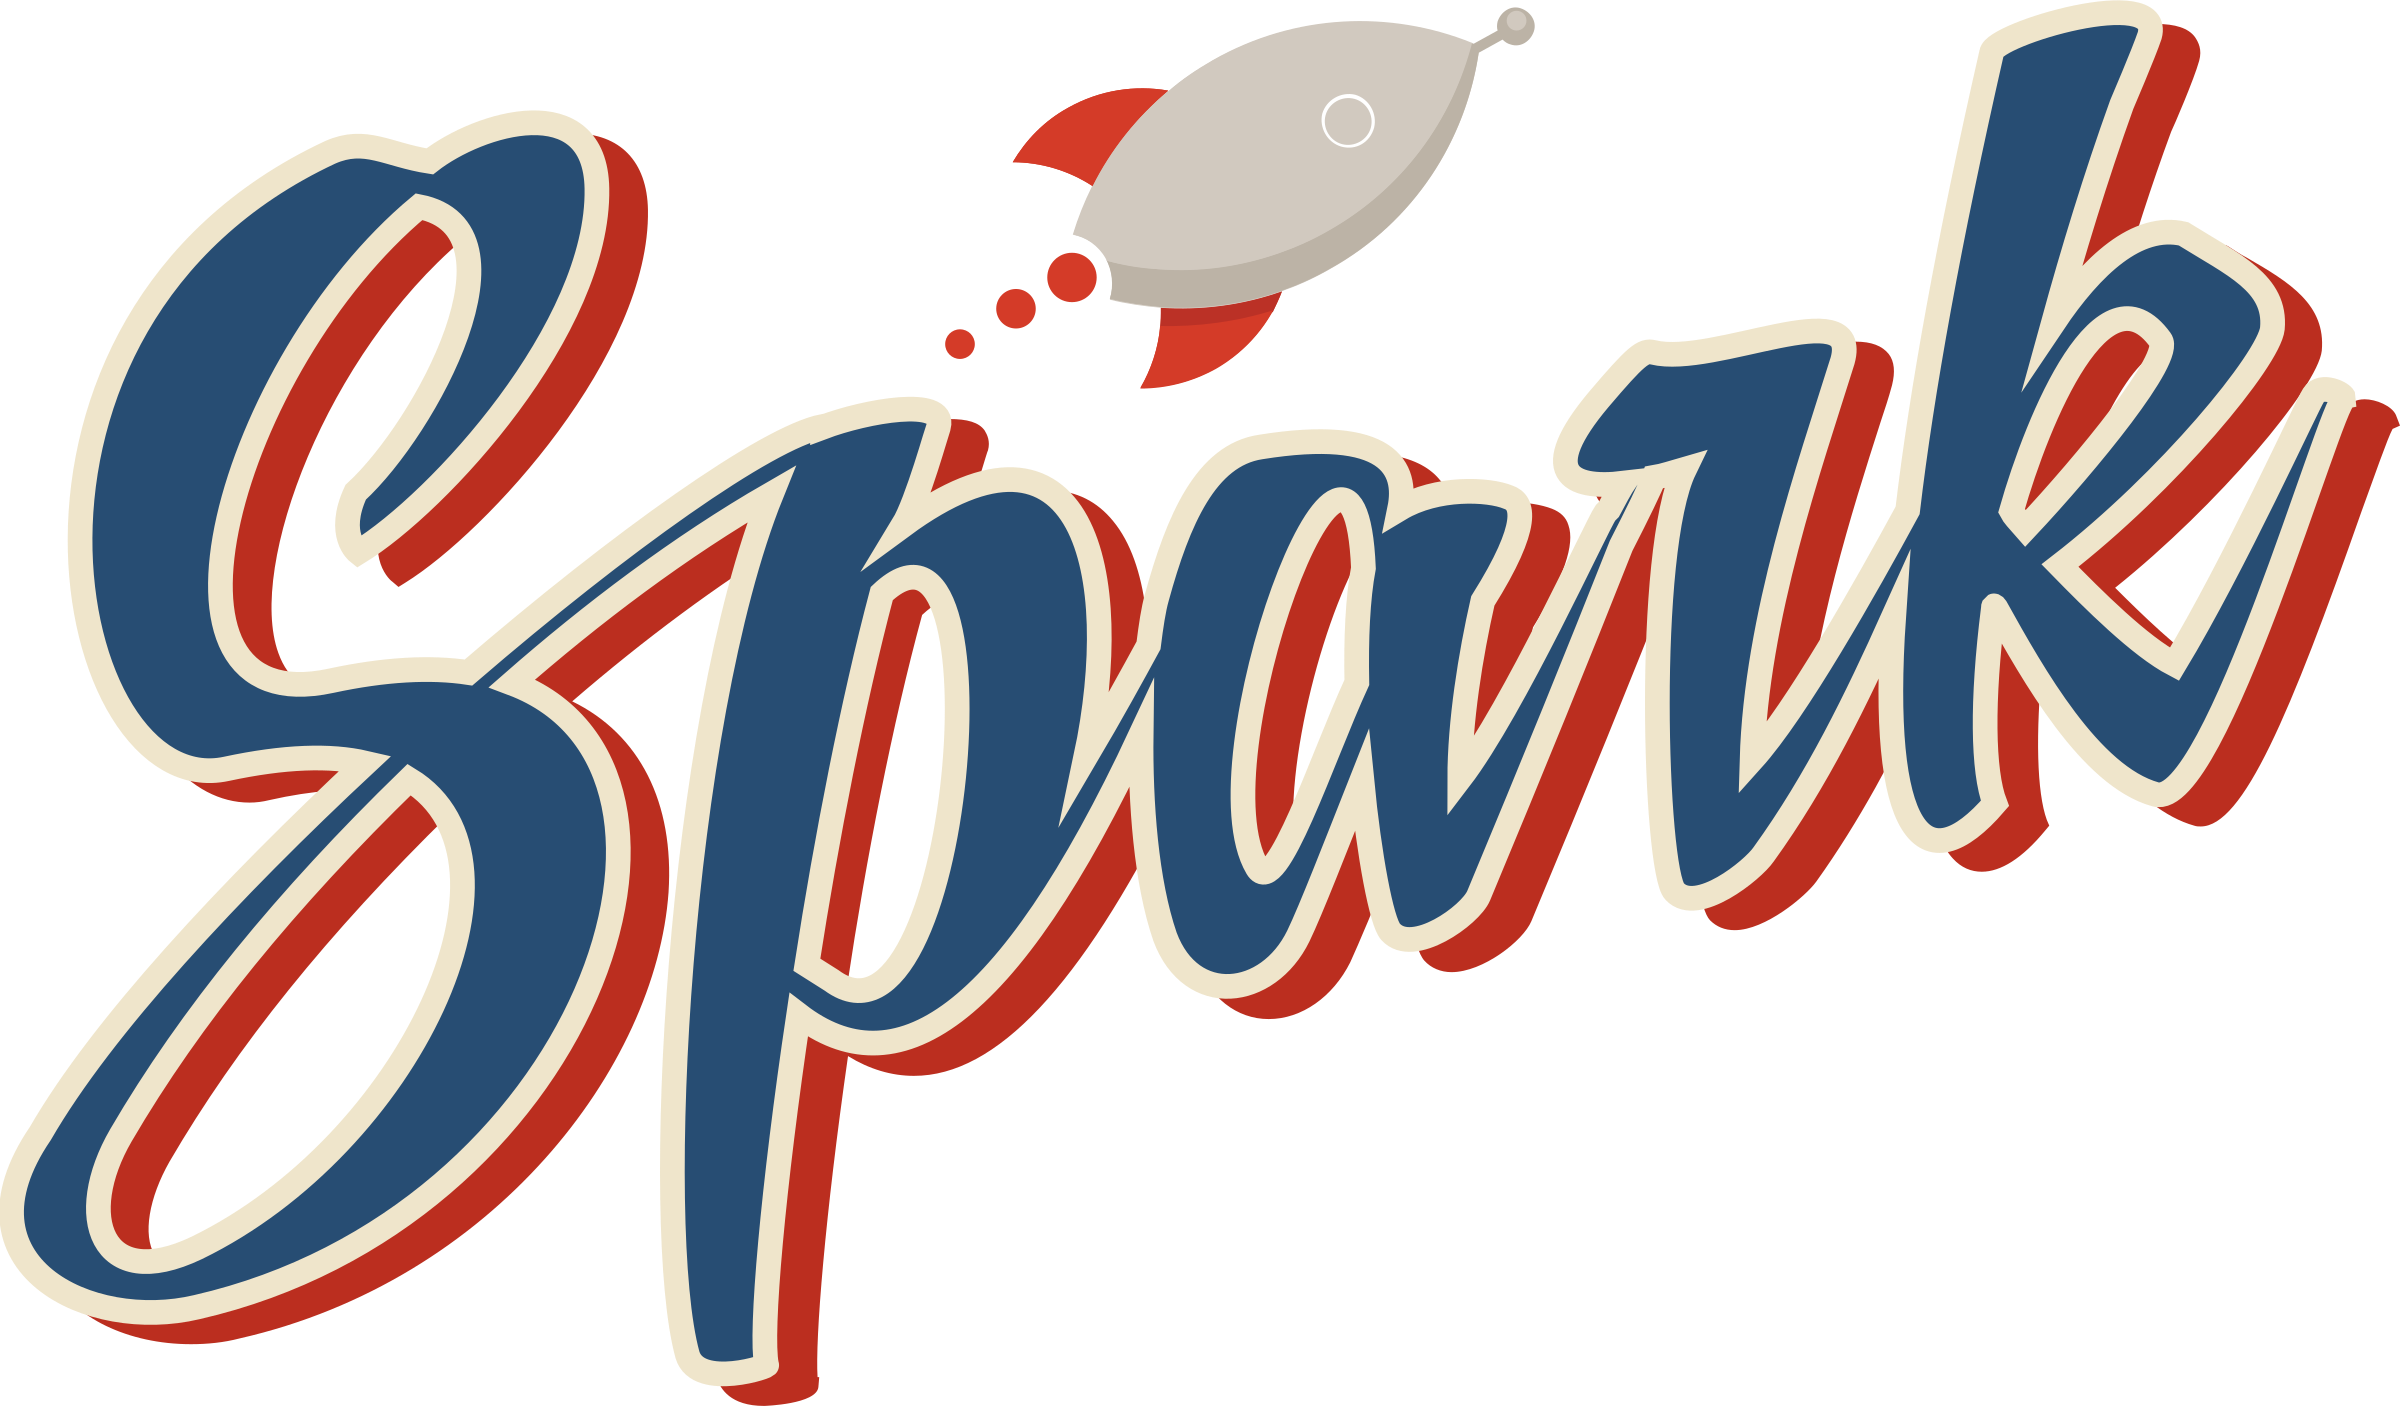 A Logo With A Rocket Flying In The Air